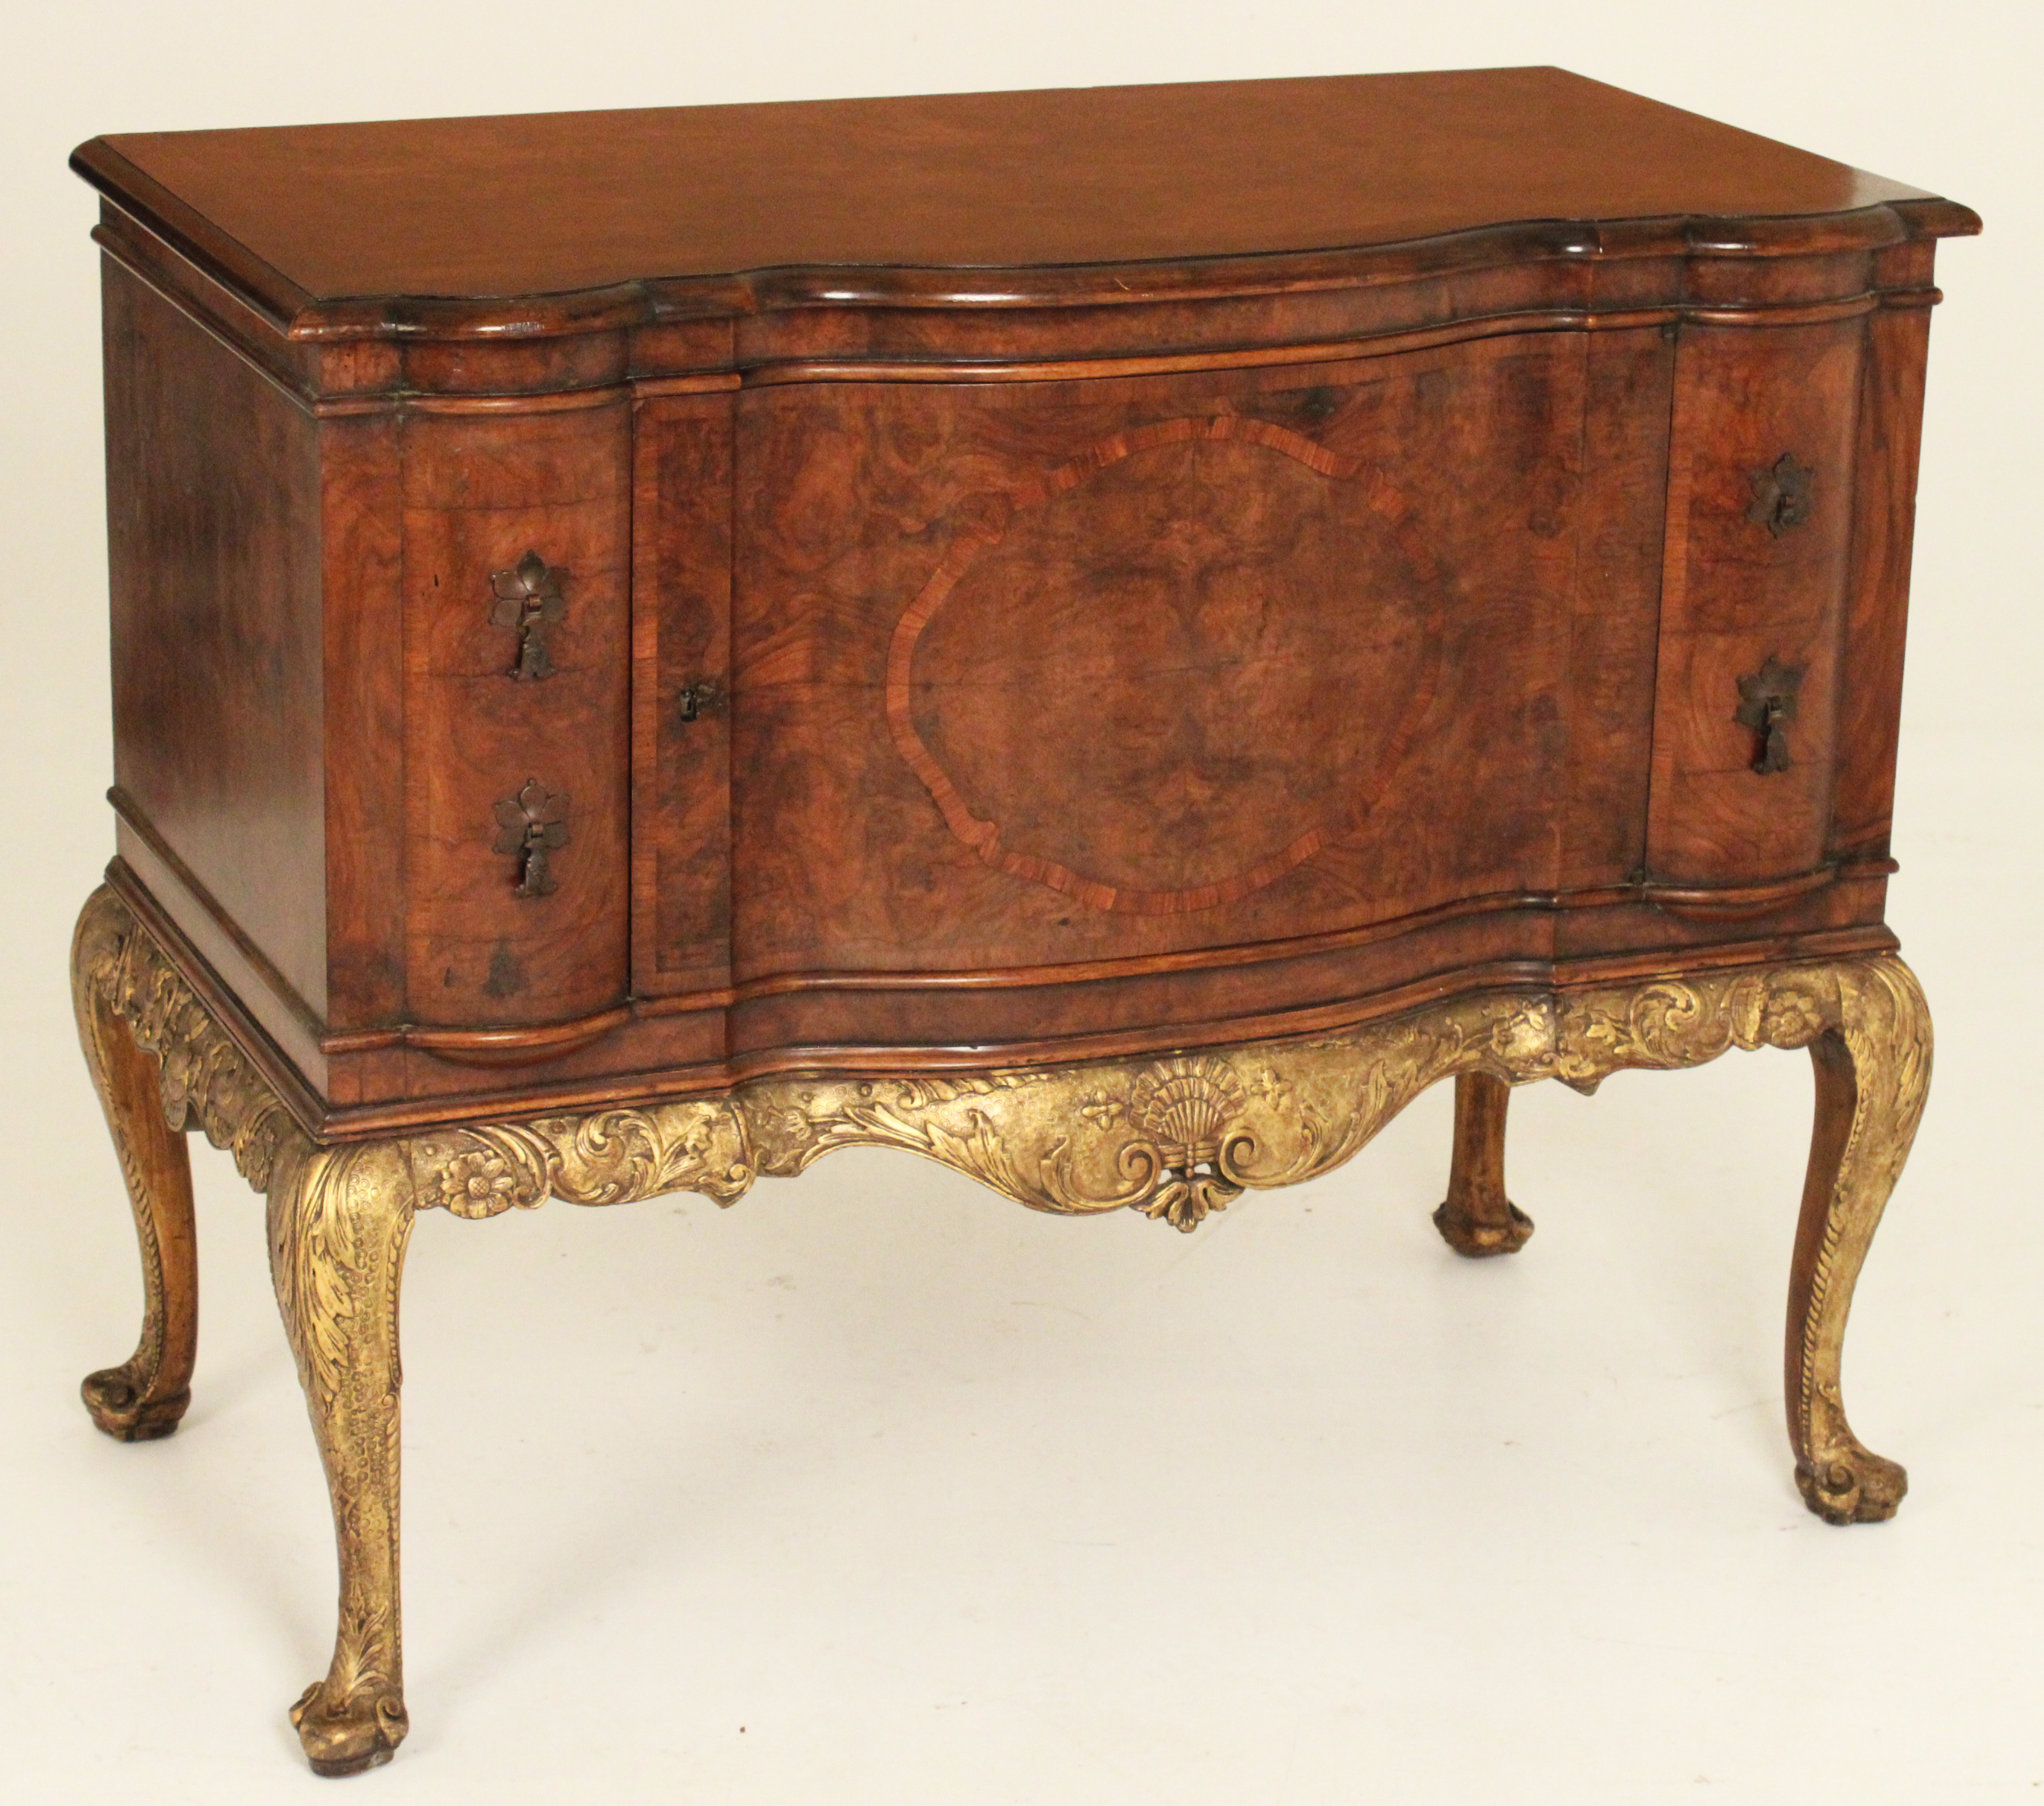 ENGLISH QUEEN ANNE STYLE COMMODE